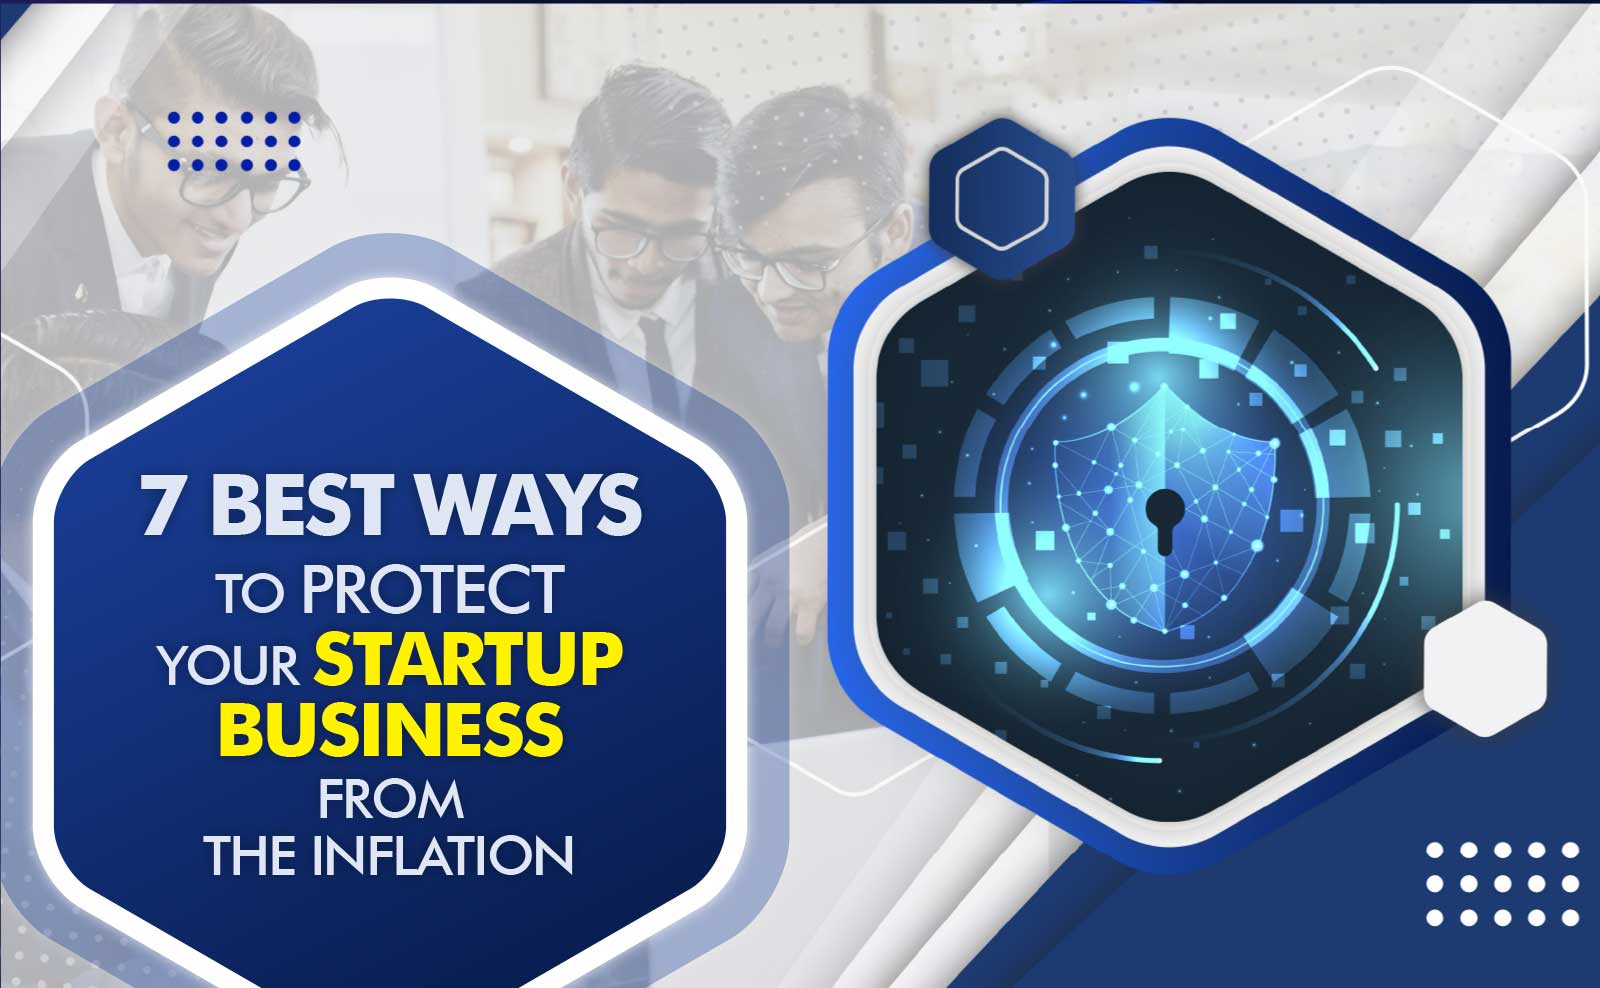 7 Best Ways To Protect Your Startup Business From The Inflation